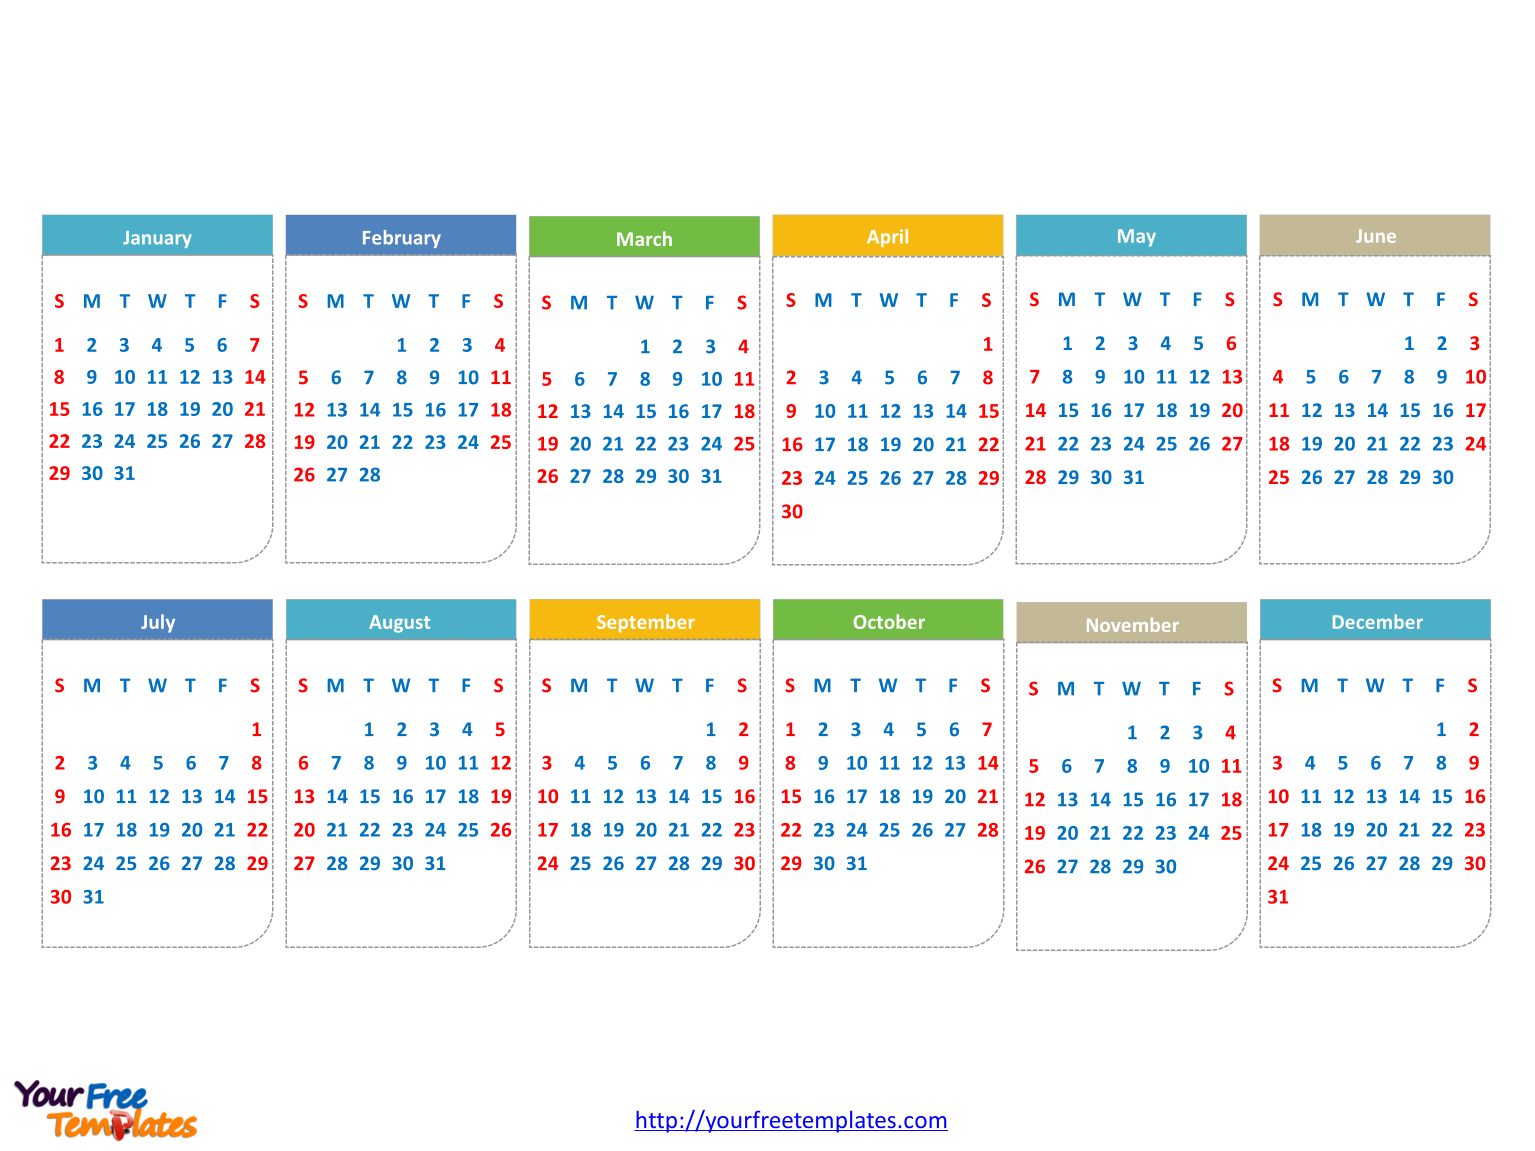 Office Calendar Template 2017 from yourfreetemplates.com